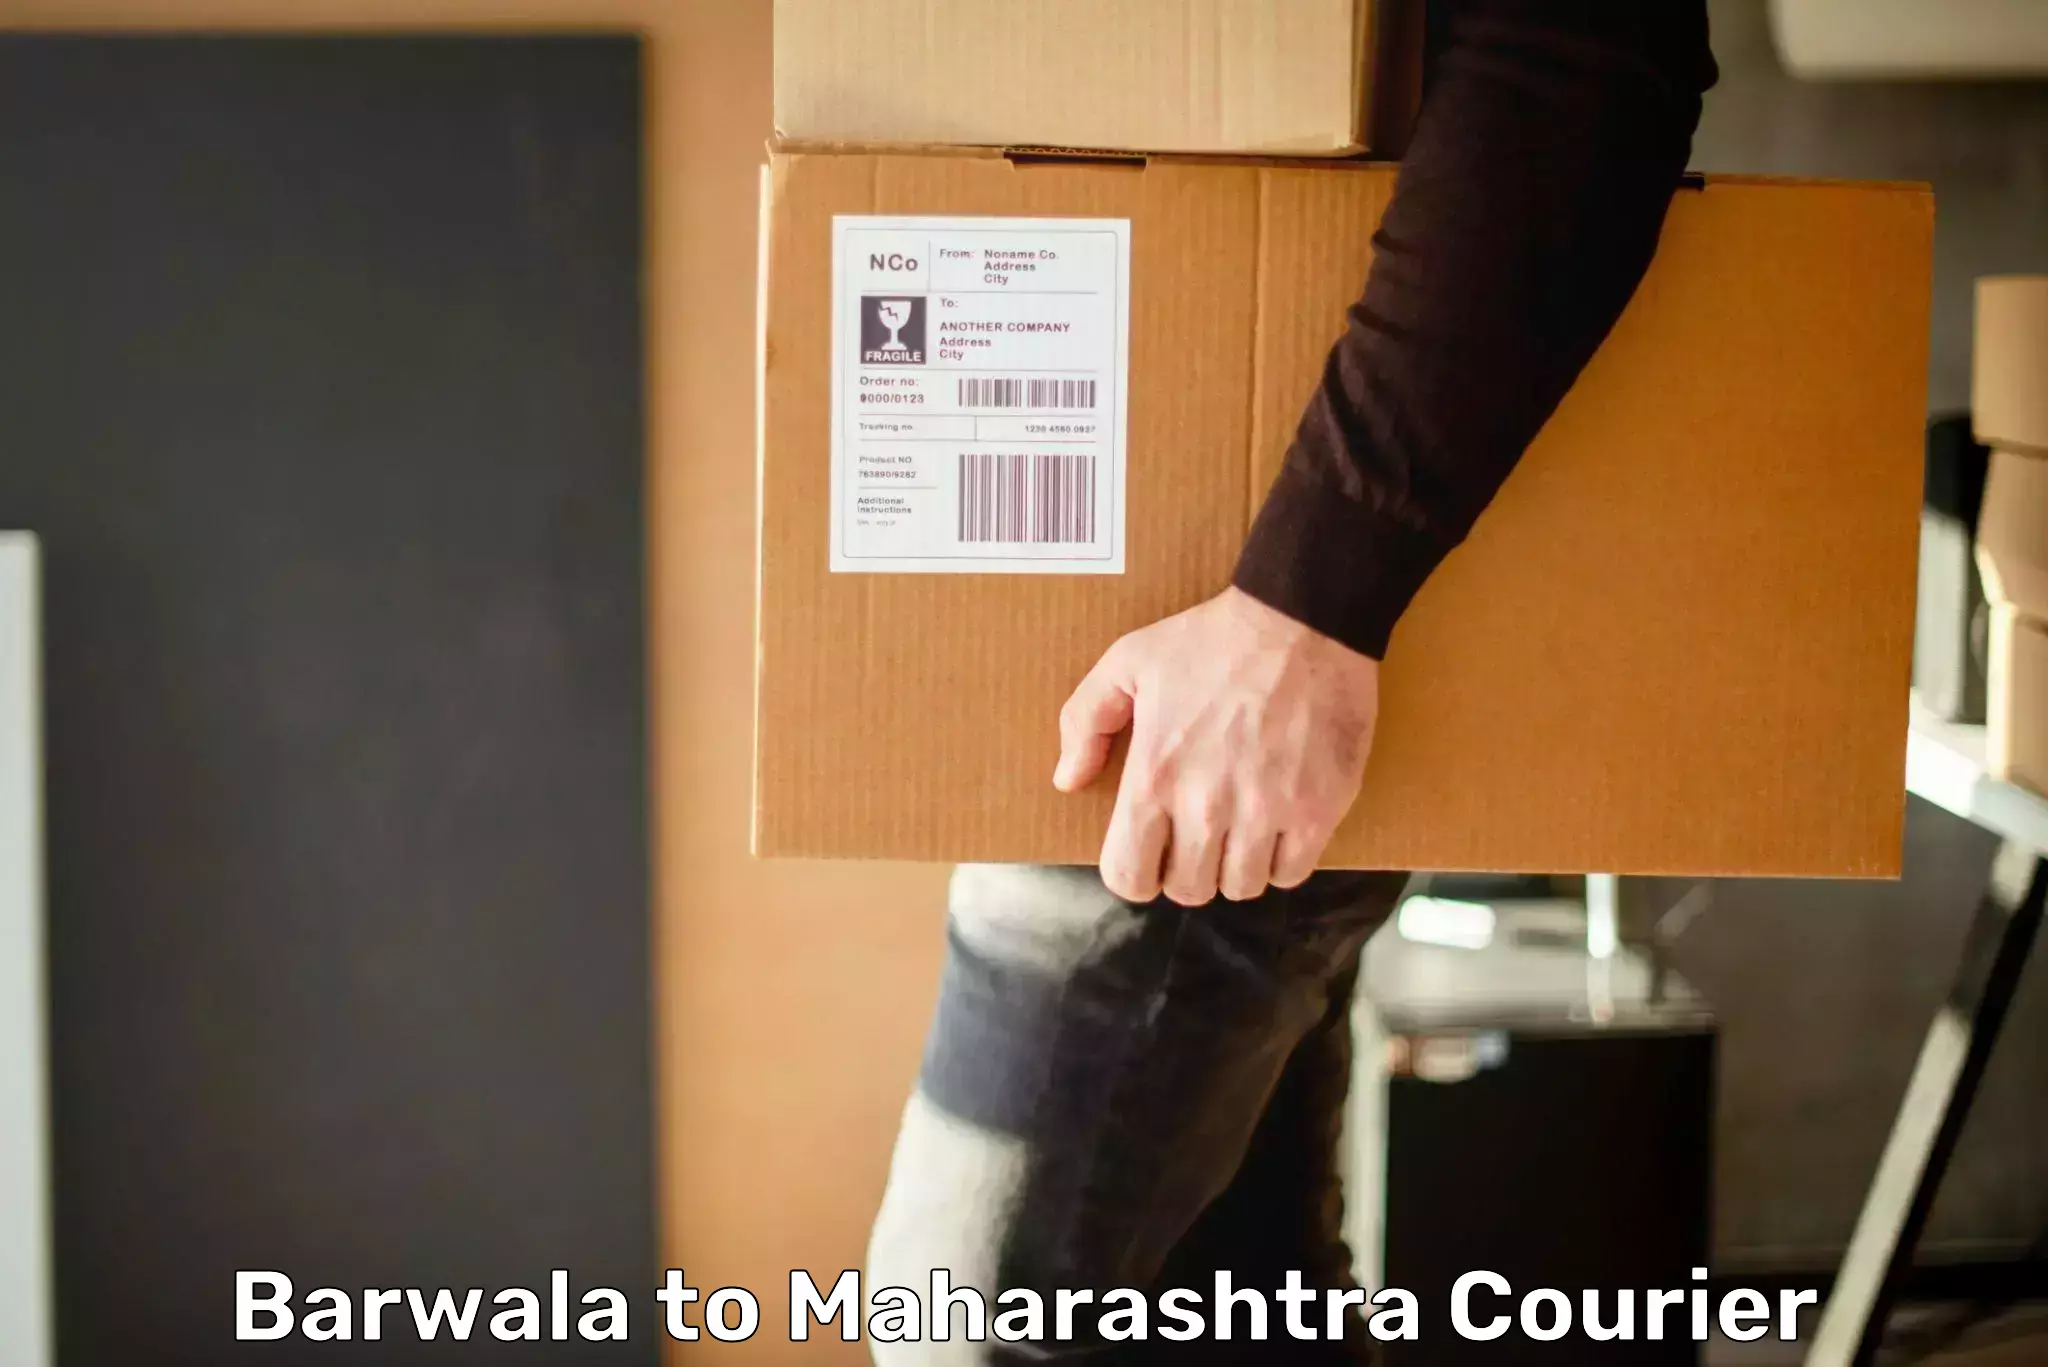 User-friendly delivery service Barwala to Talegaon Dabhade